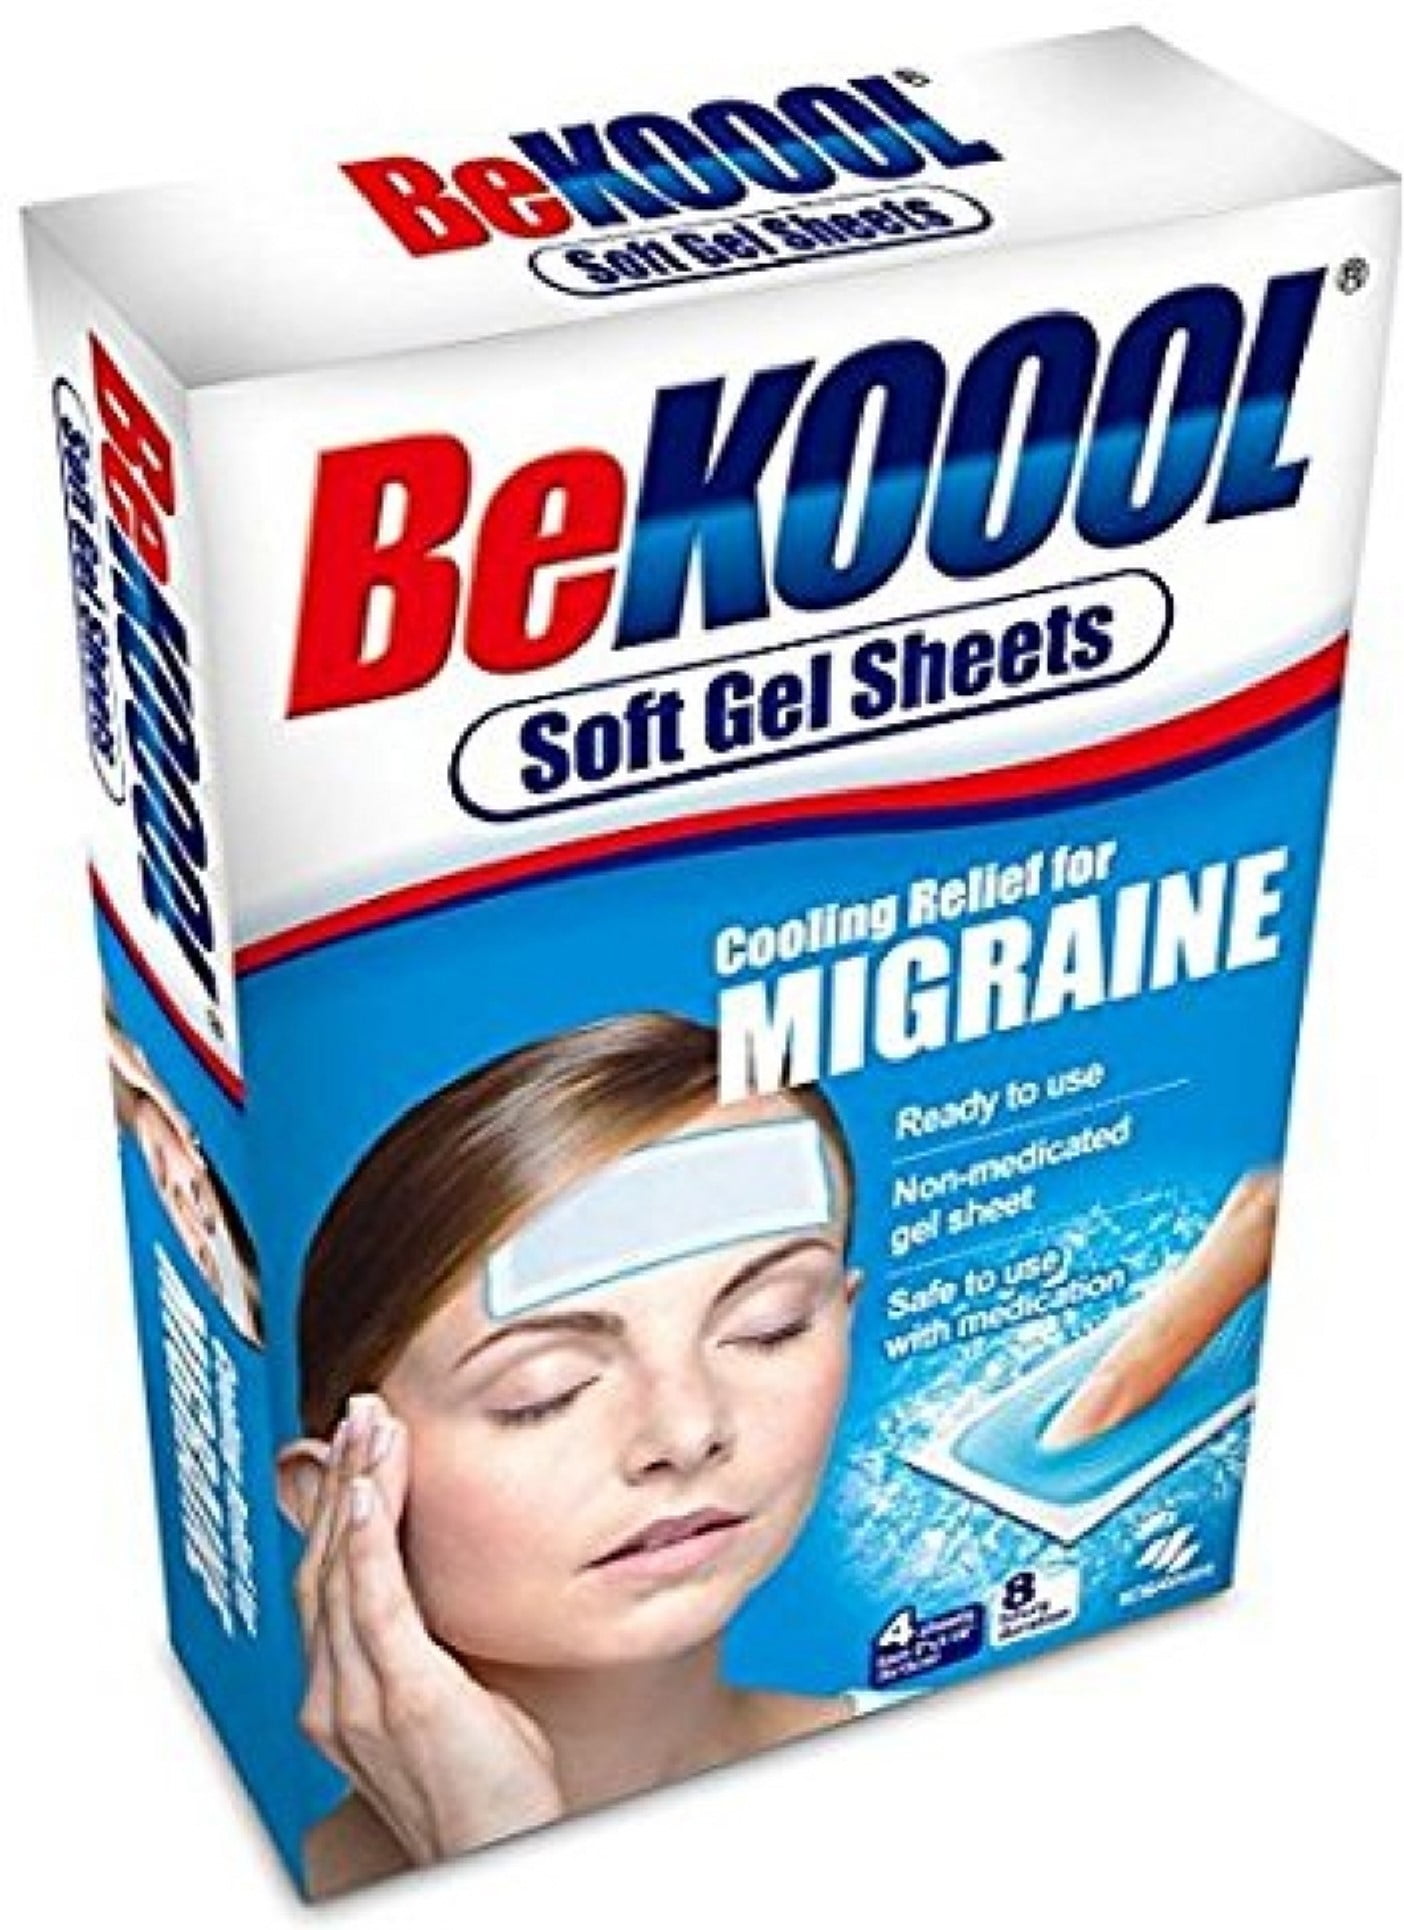 Be Koool Cooling Relief For Migraine 